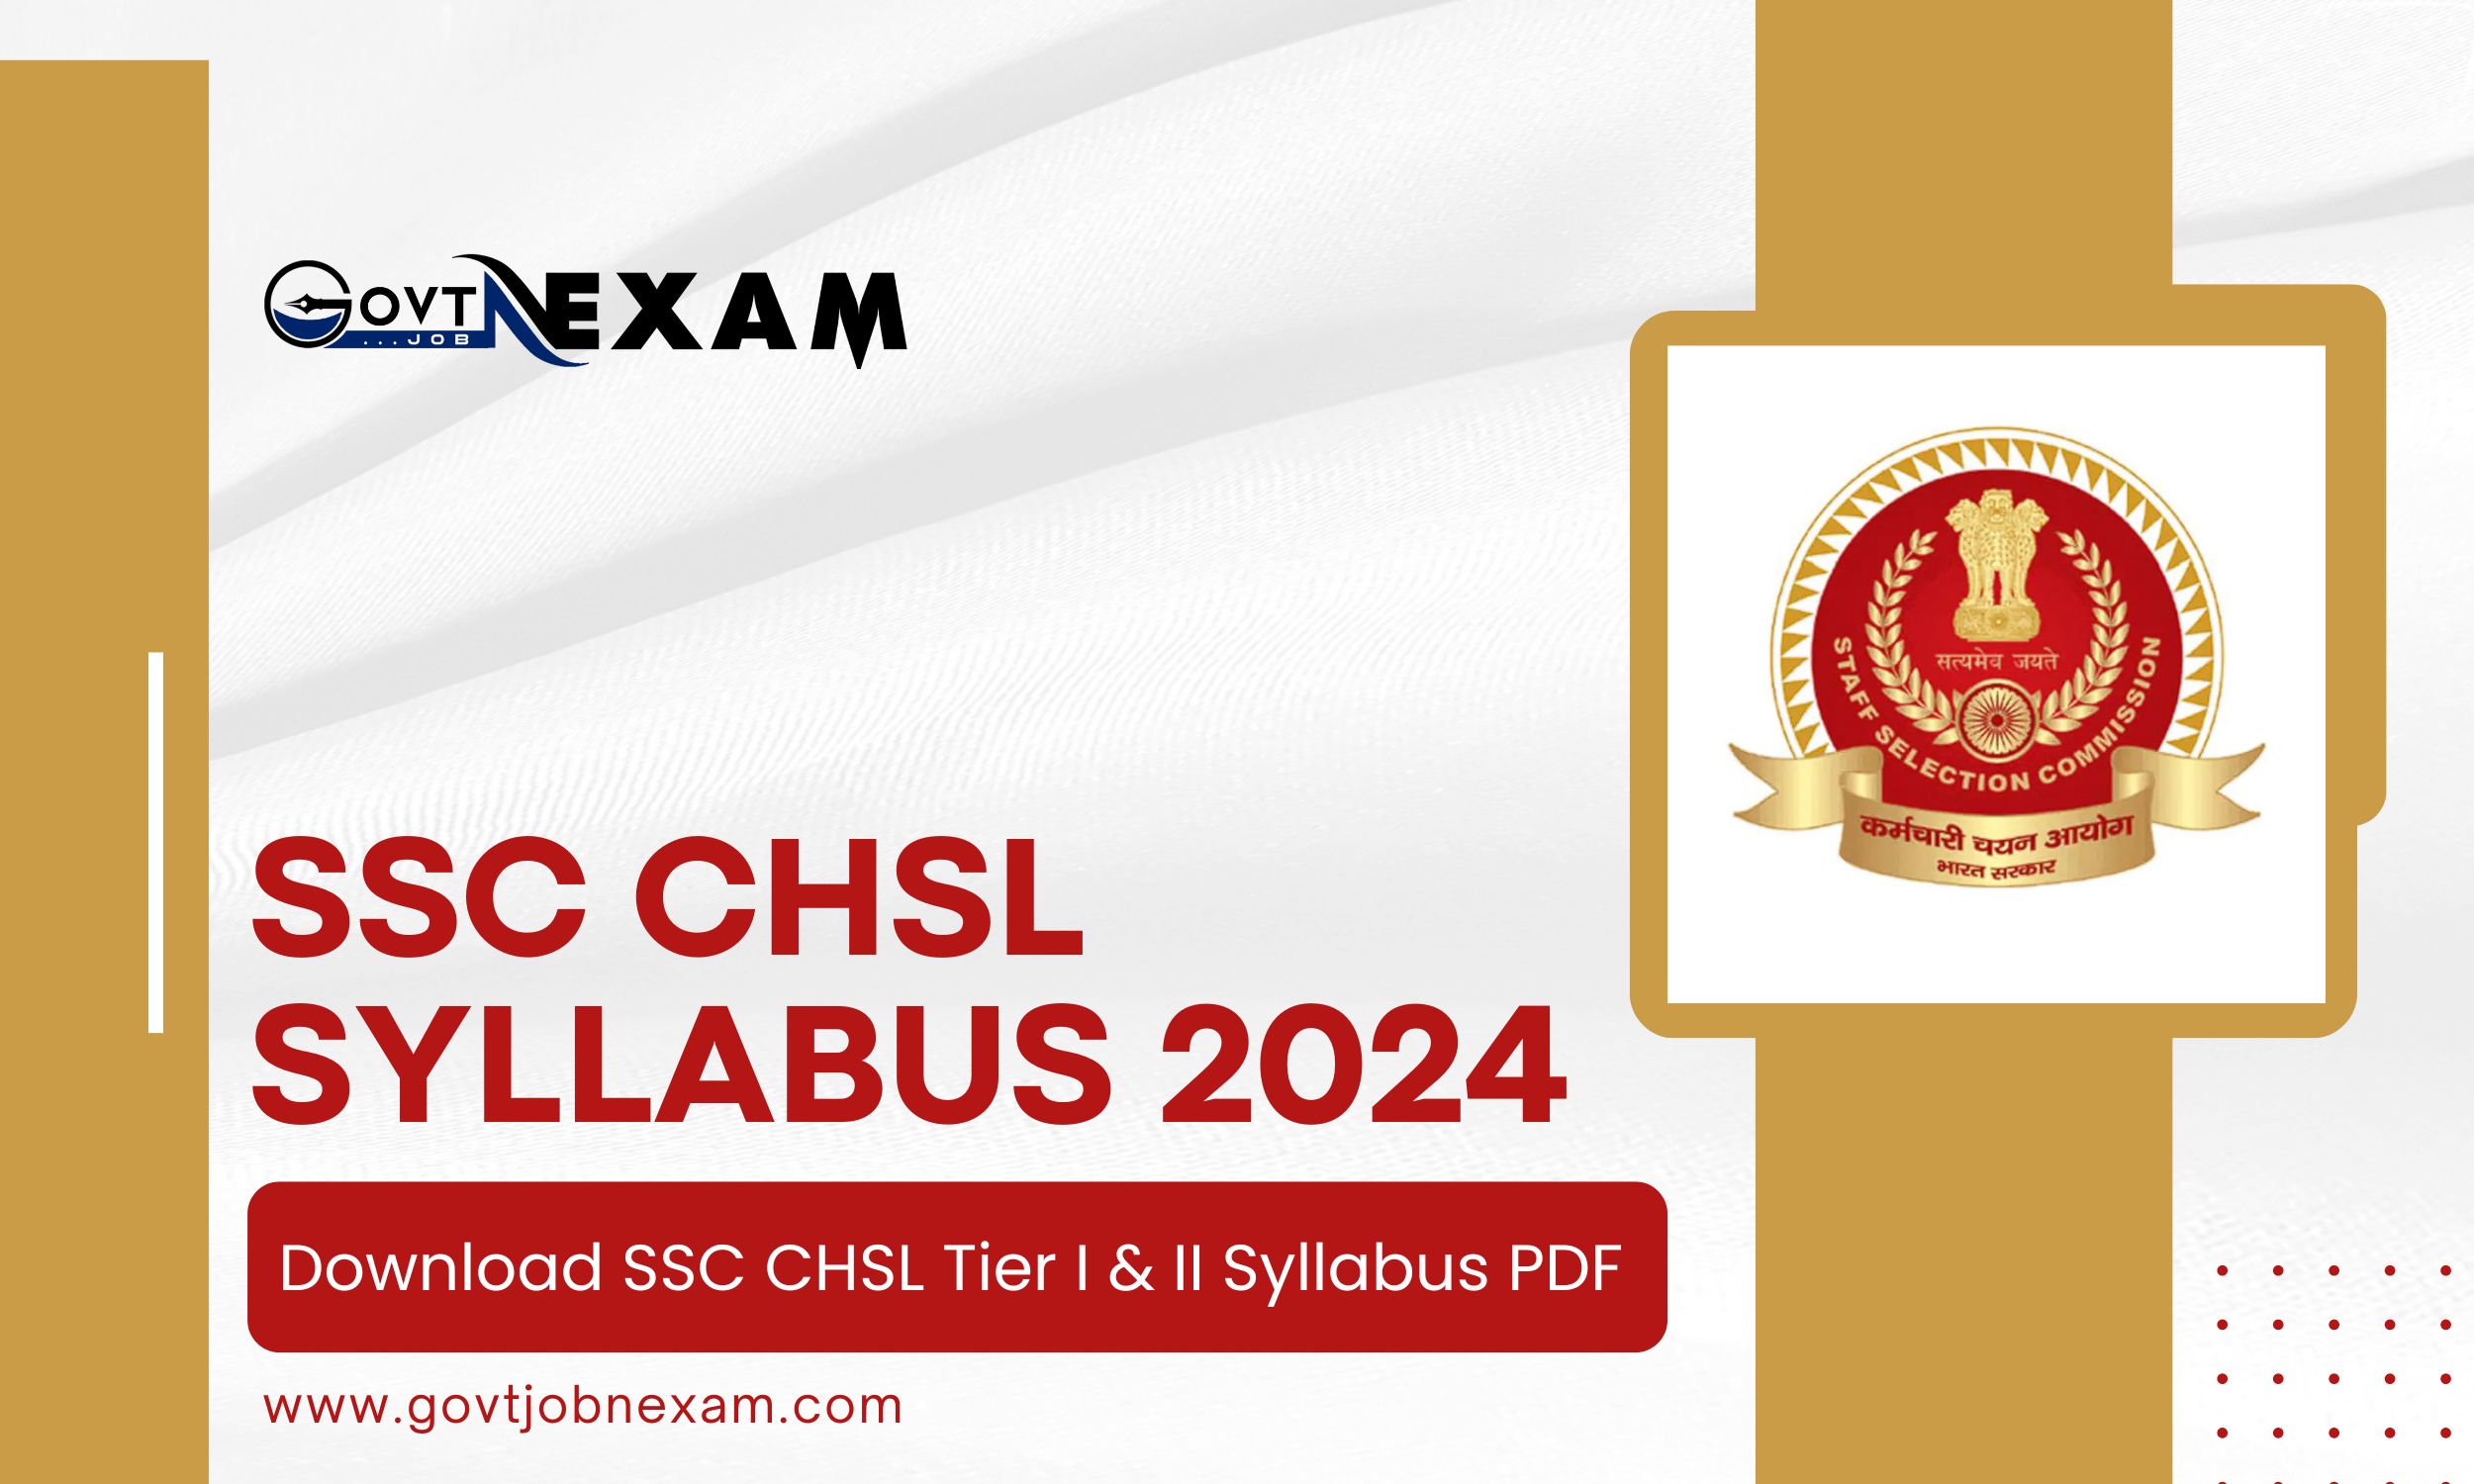 You are currently viewing SSC CHSL Syllabus 2024: Download SSC CHSL Tier I & II Syllabus PDF in English